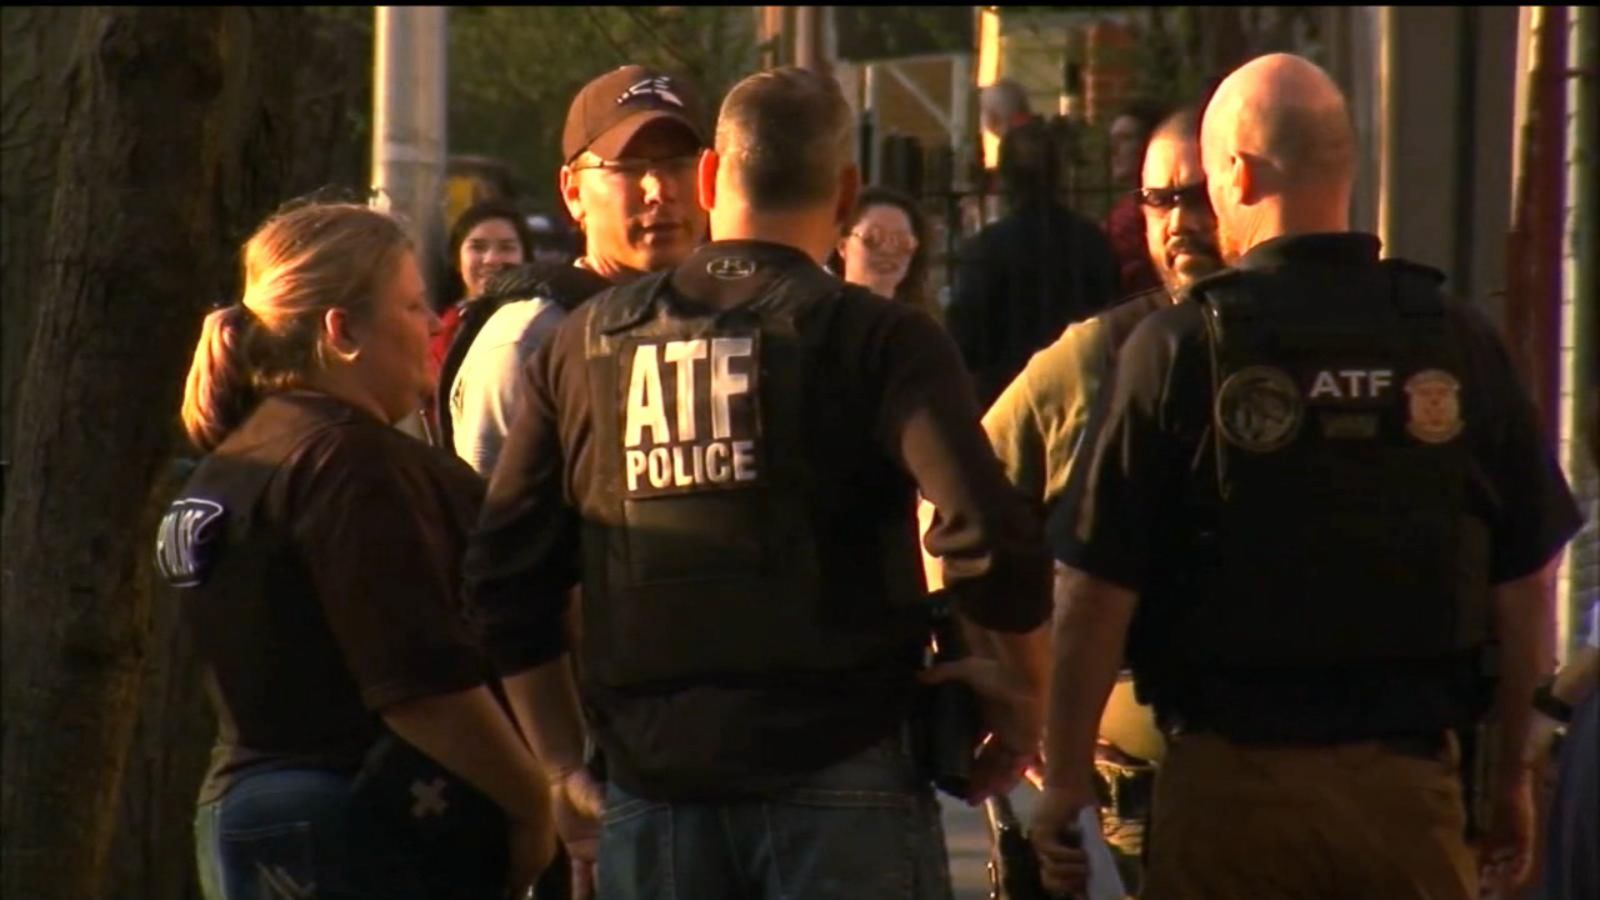 Undercover Atf Agent Shot In The Face Good Morning America